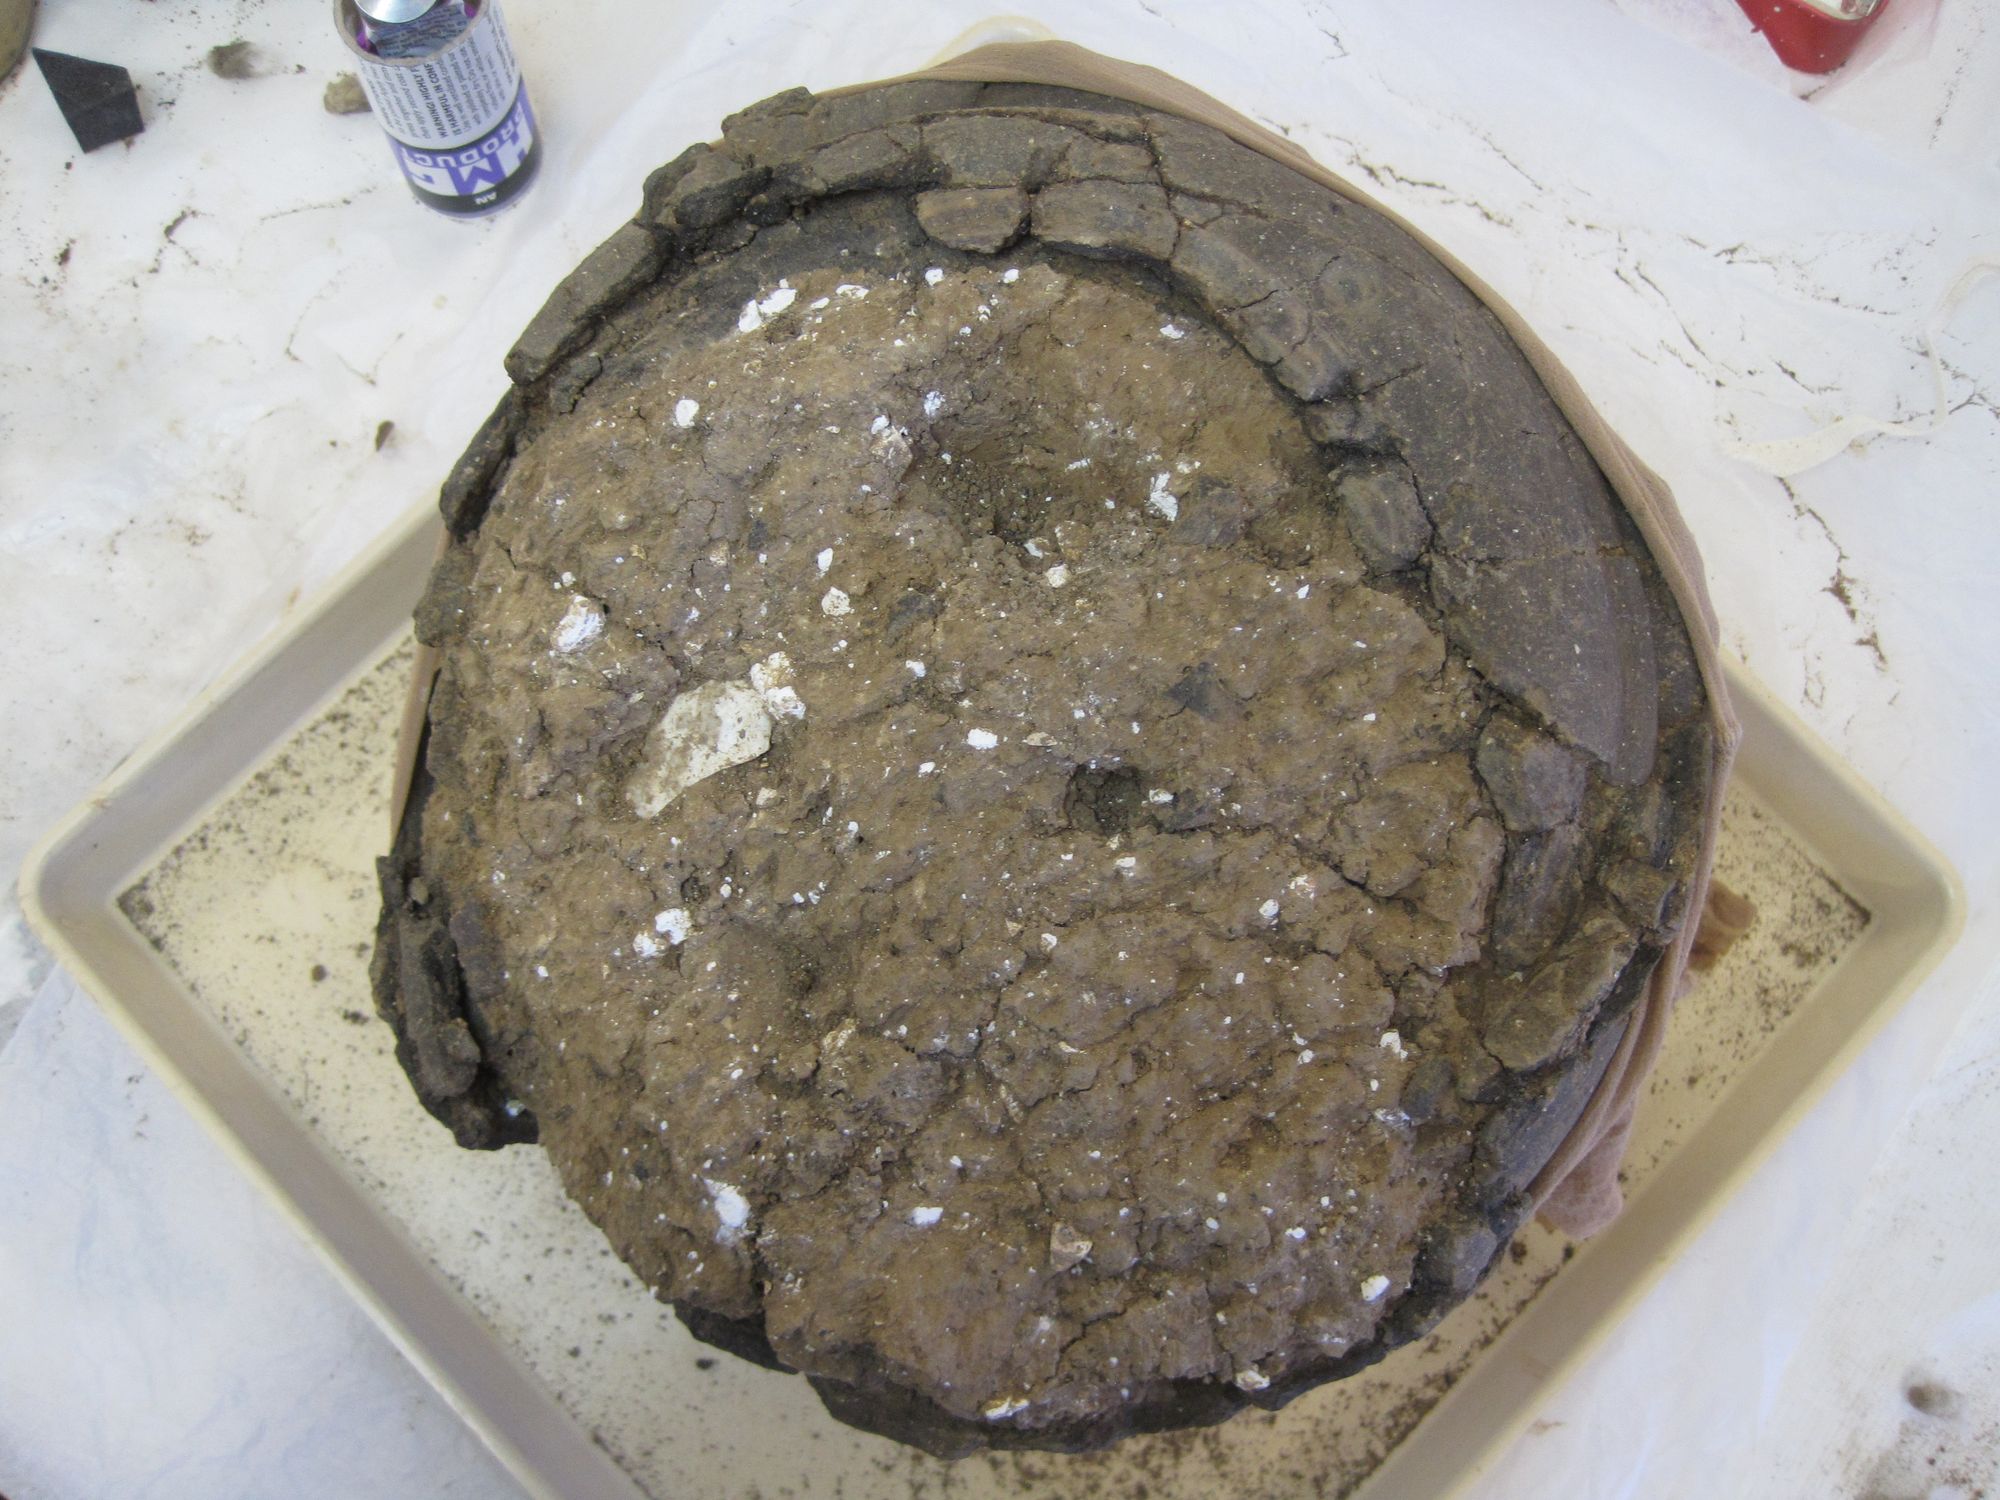 Text Box: The external surface has been cleaned and the pot is ready for micro-excavation.